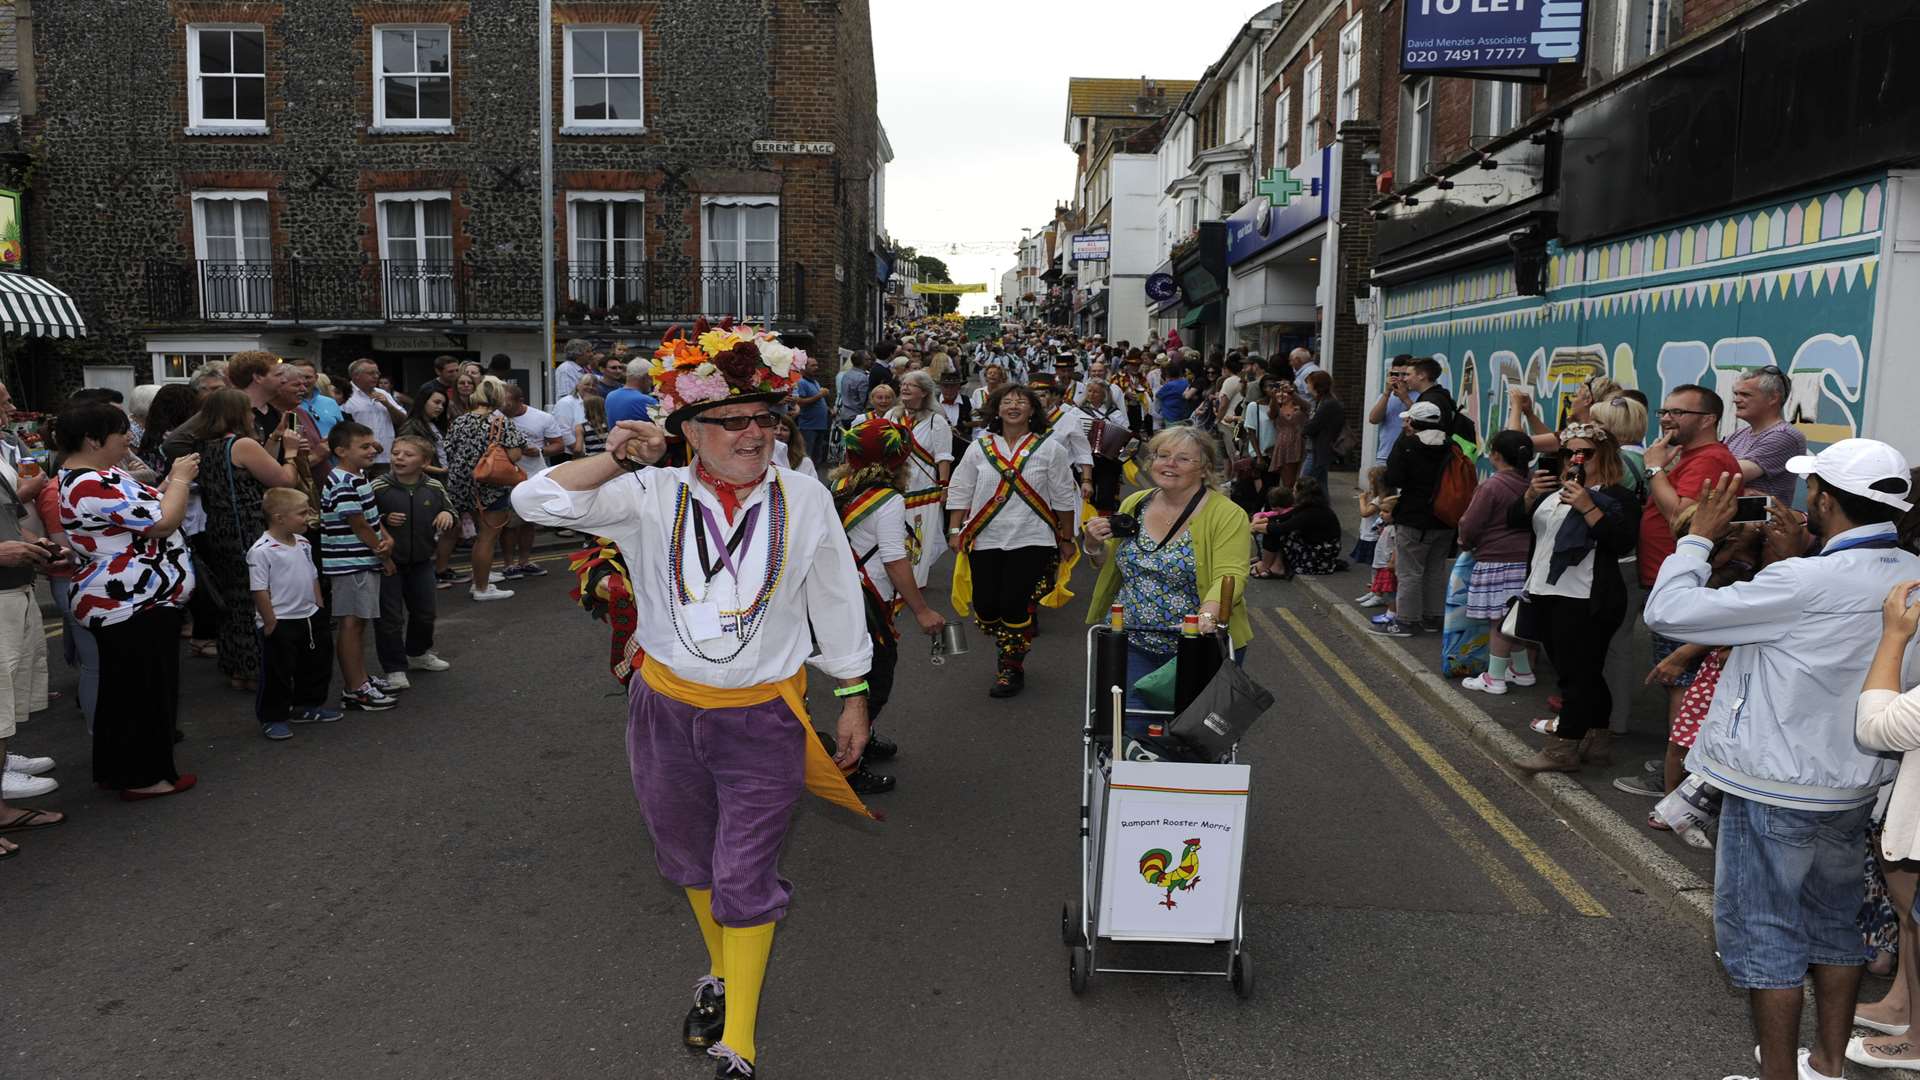 Broadstairs Folk Week marred by youths fighting in the High Street